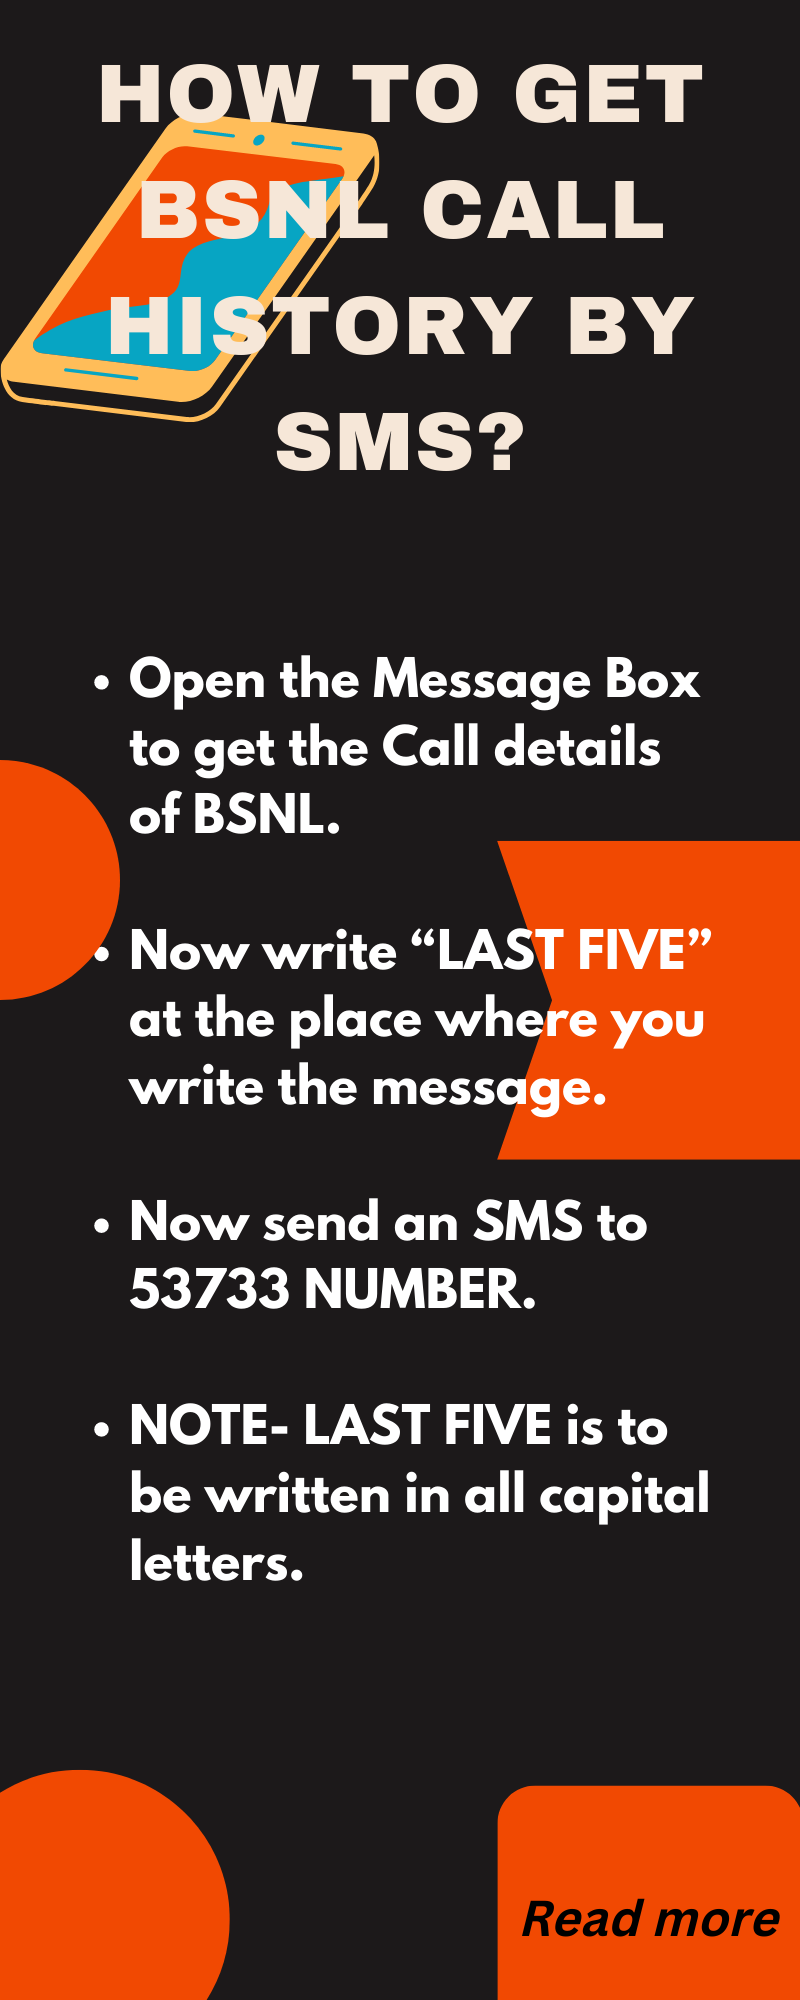 bsnl call history details by SMS